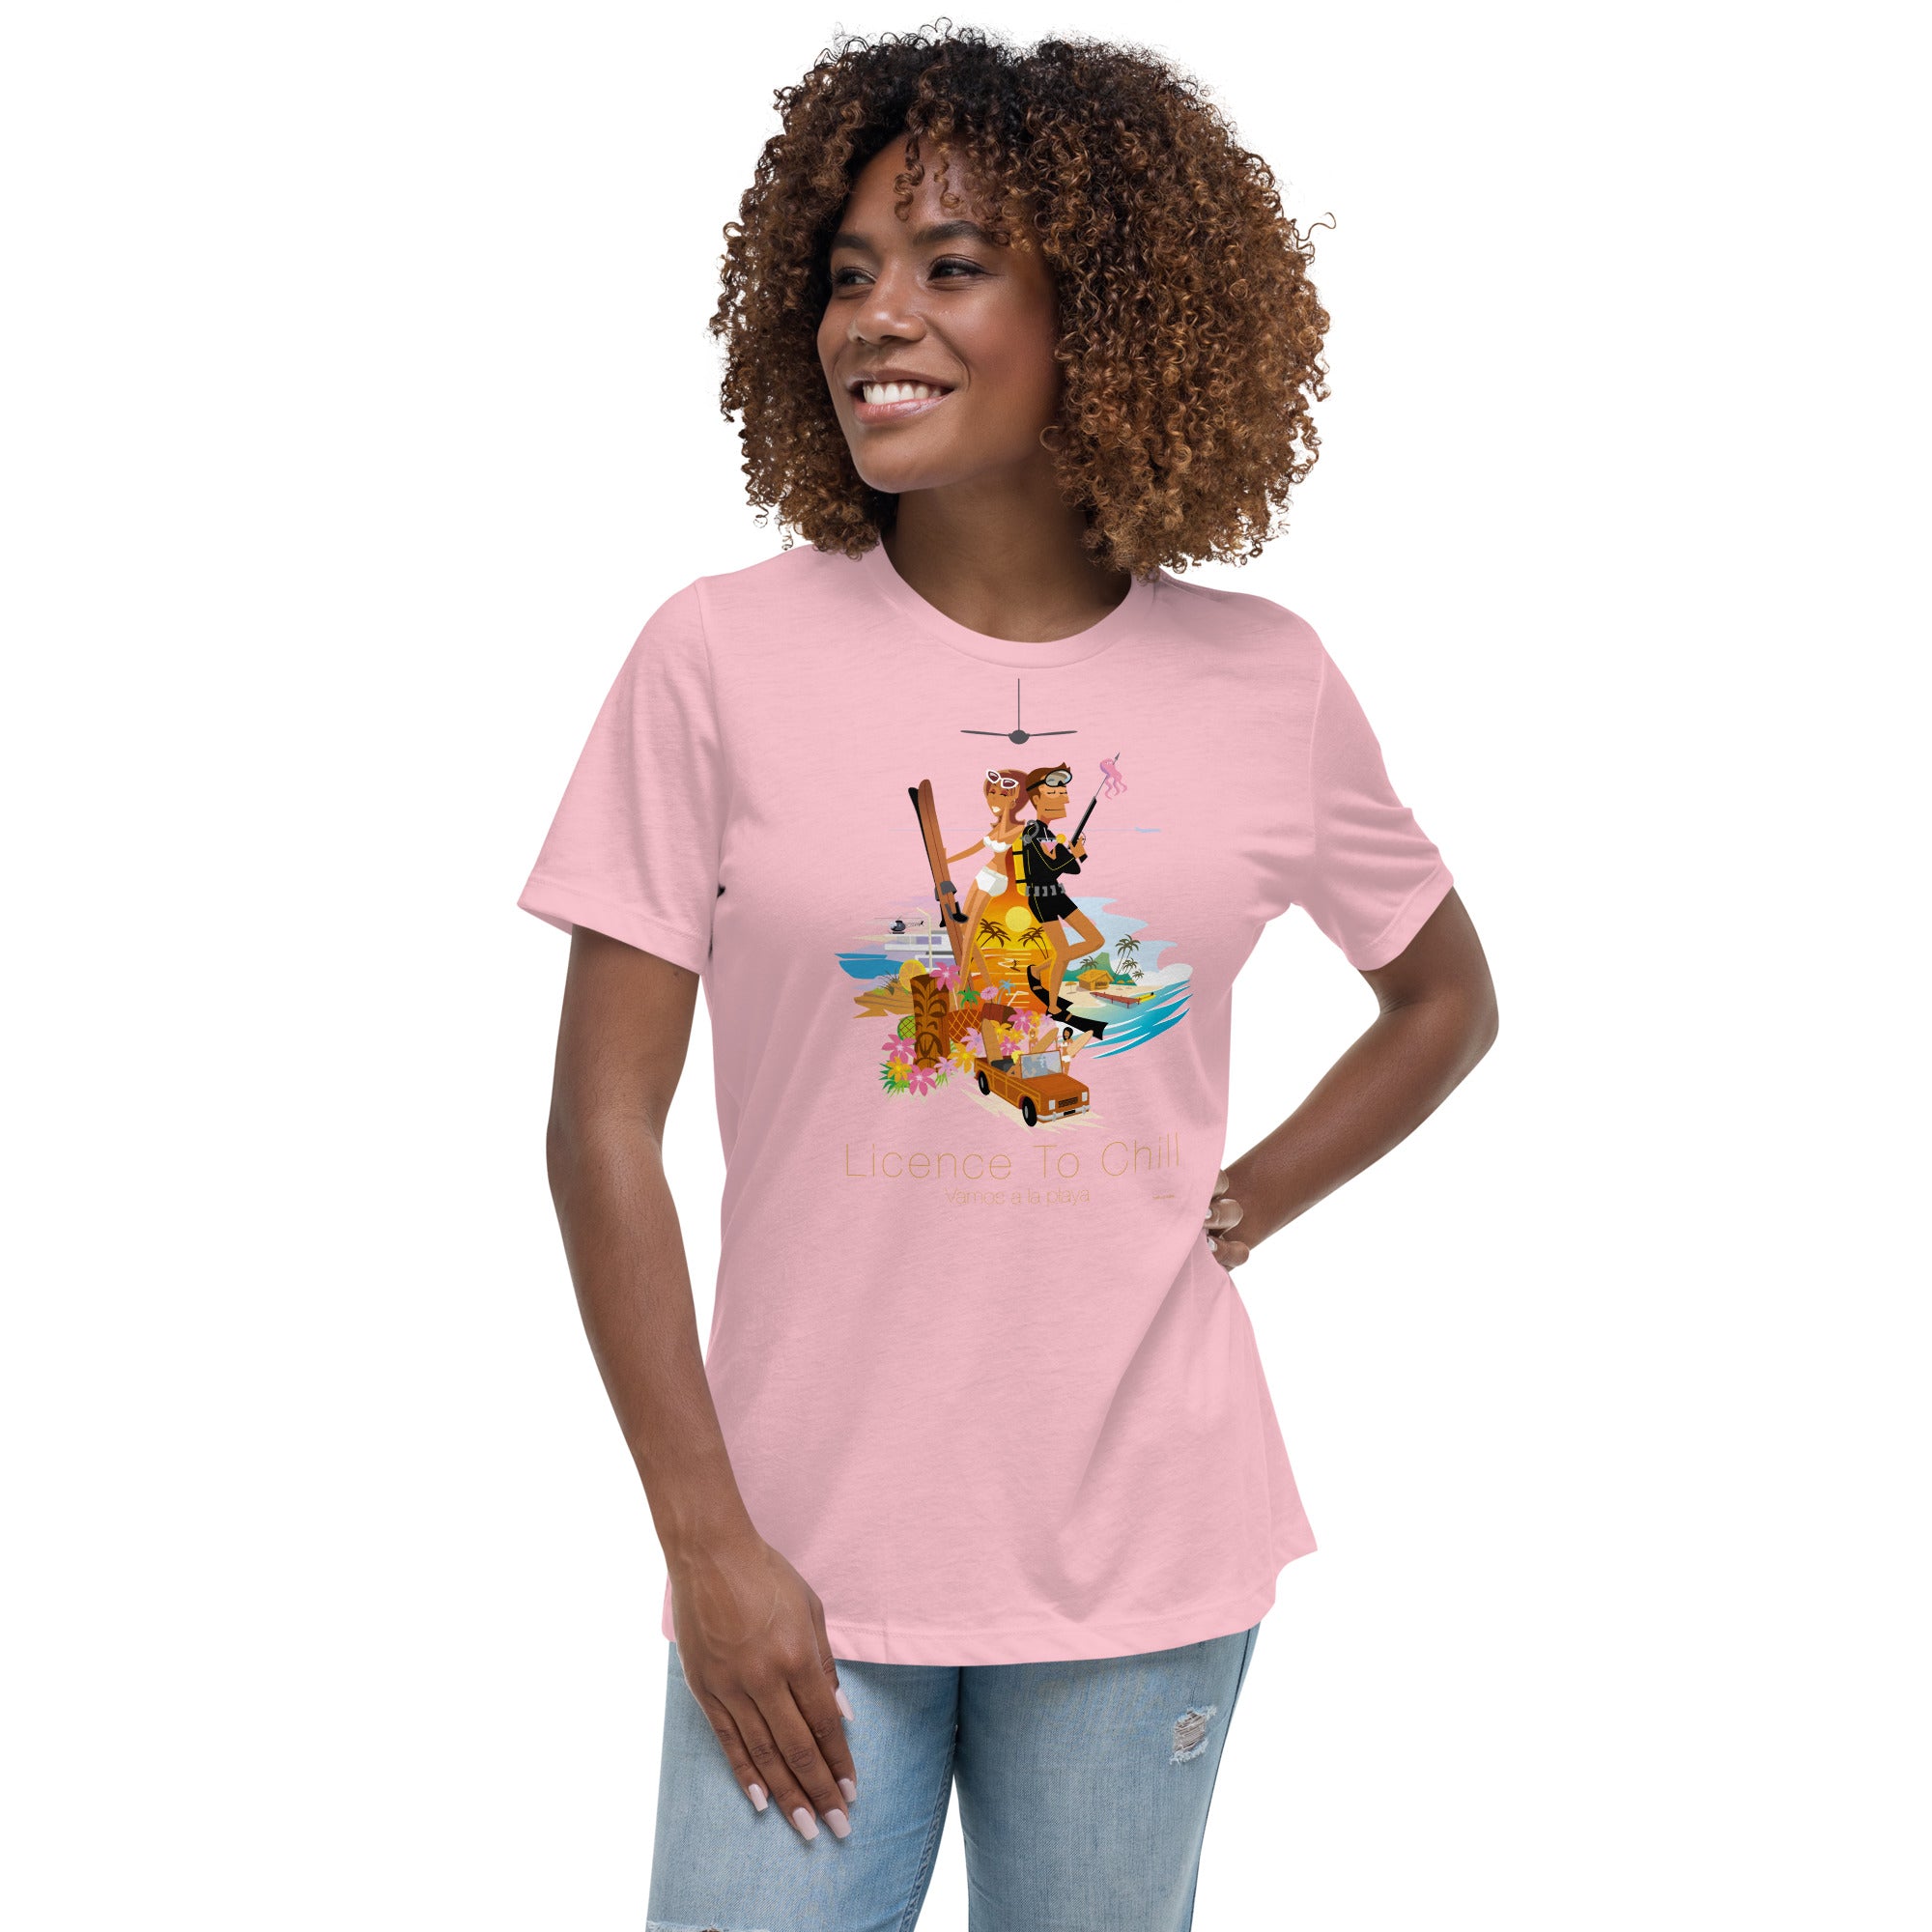 Women's Relaxed T-Shirt License to Chill Vamos a la Playa